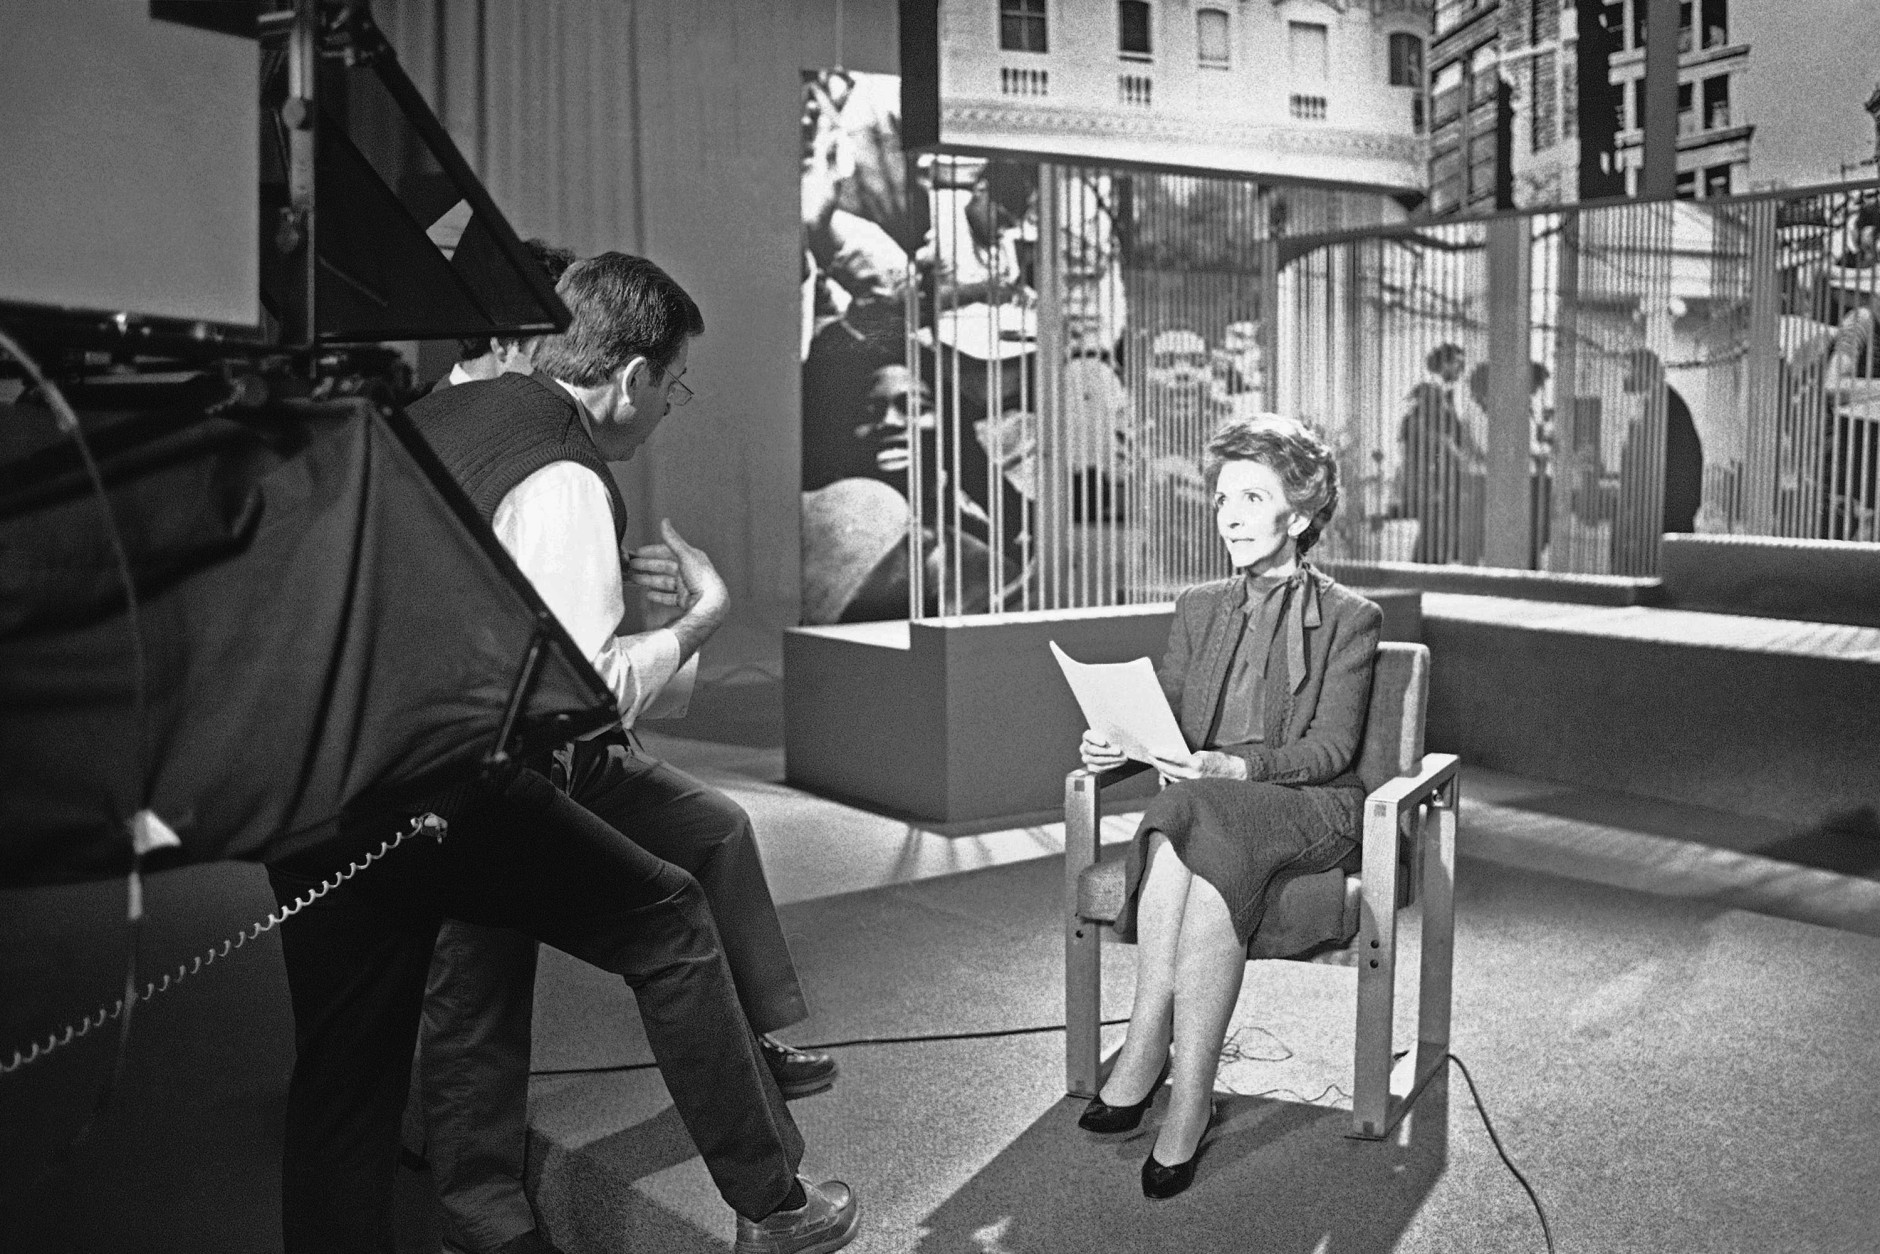 Nancy Reagan takes a show for Public Broadcasting Service concerning teenage drug and alcohol abuse on Wednesday, April 14, 1983 in Pittsburgh. The program offered was to fight drug abuse among young people. (AP Photo/Gene J. Puskar)